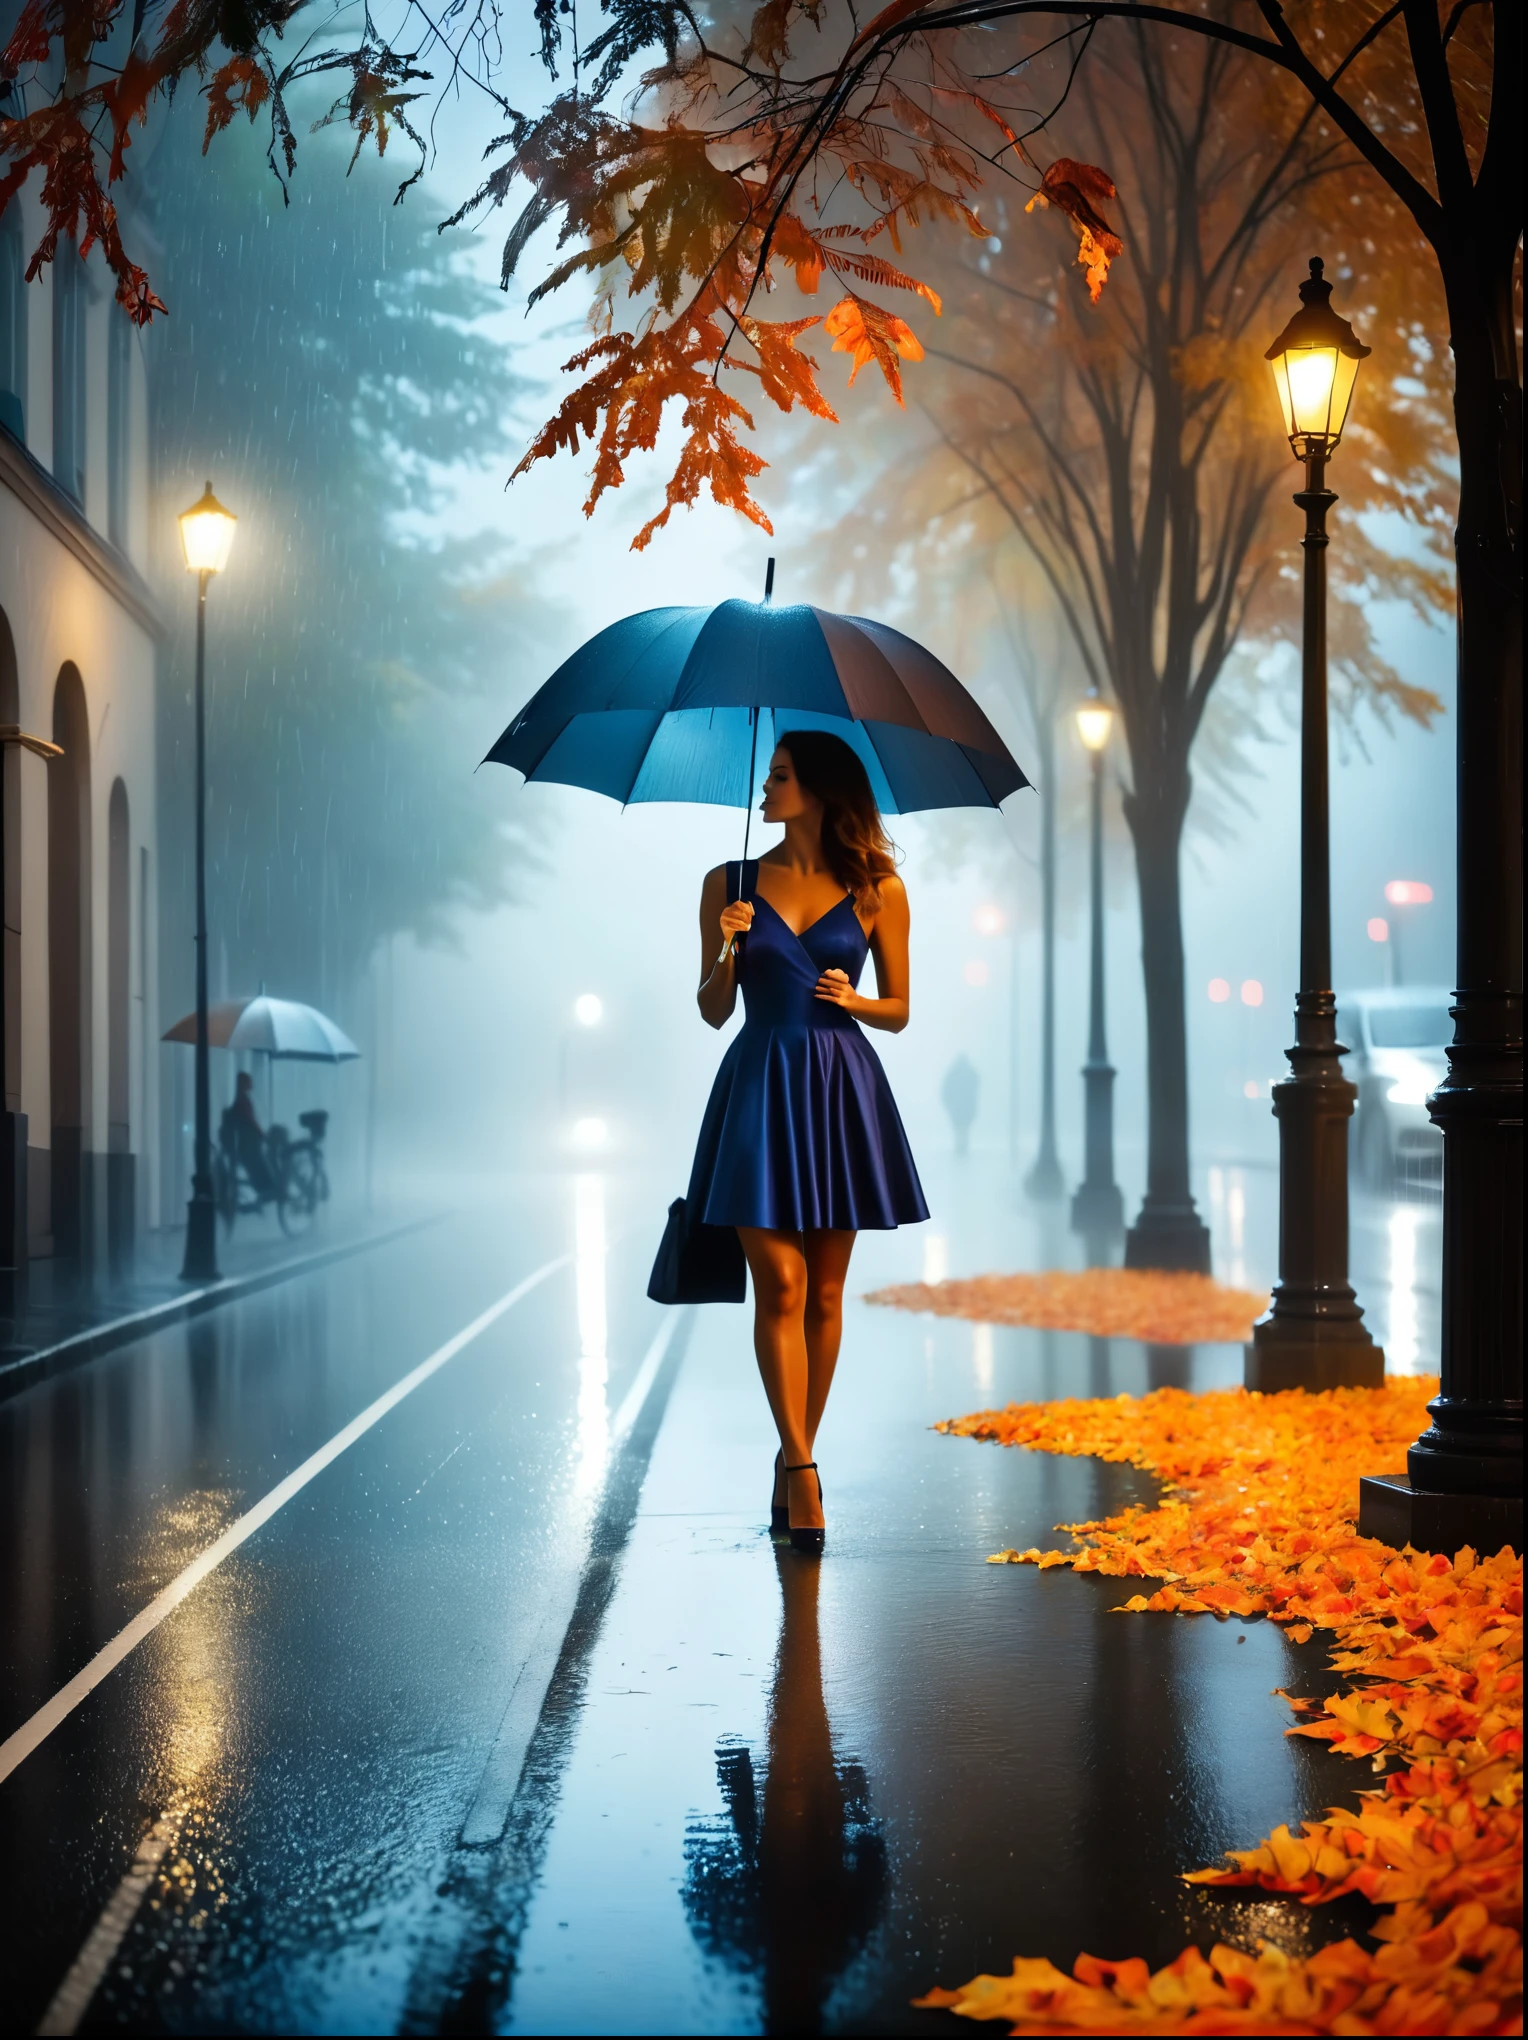 Woman in tight dress with umbrella in hand, in einer mistyen Stadt, colorful autumn leaves on the street, a picture by Kuno Veeber, pixabay contest winner, conceptual art, standing in the rain, mysterious woman, pretty girl, that stands in the rain, Single person with umbrella, woman ((silhouette)), ((misty)) and rainy, female image in the shadow, in a rainy environment, Rainy weather, Rainy roads in the background , ((Fog with light)), ((View from behind)), Light from the front